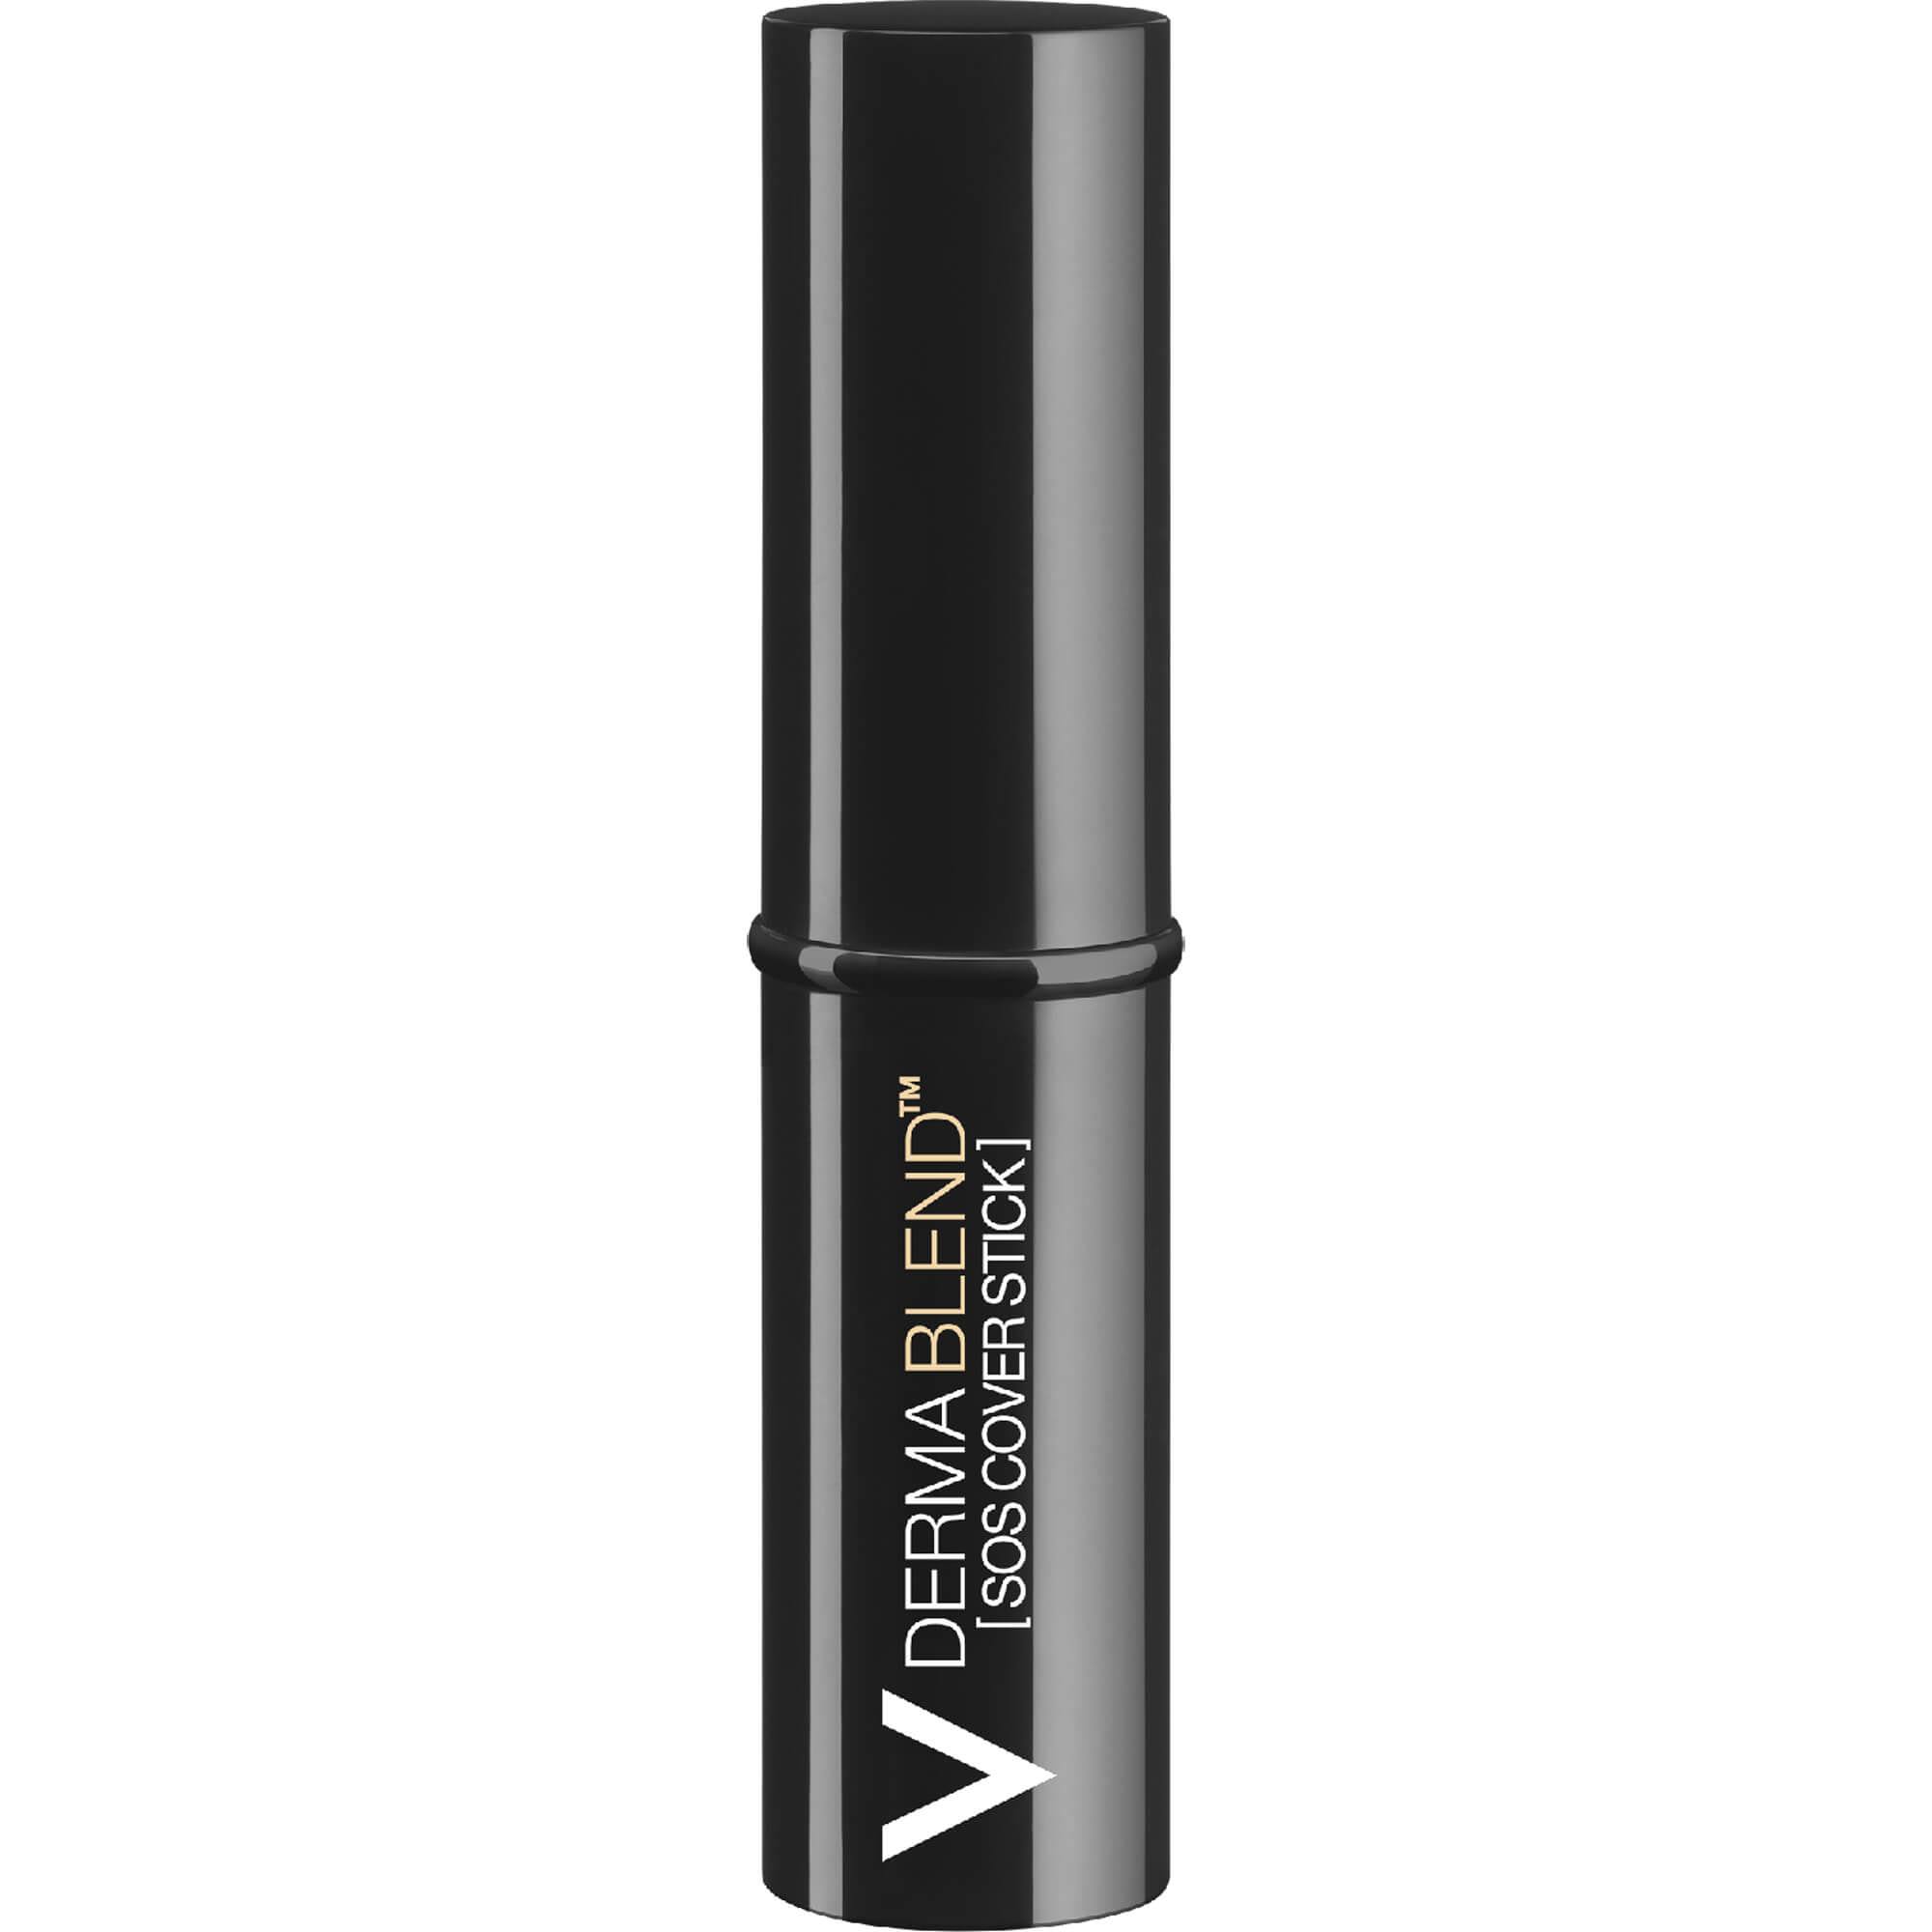 Vichy Dermablend SOS Cover Stick - 35 Sand, 4.5g